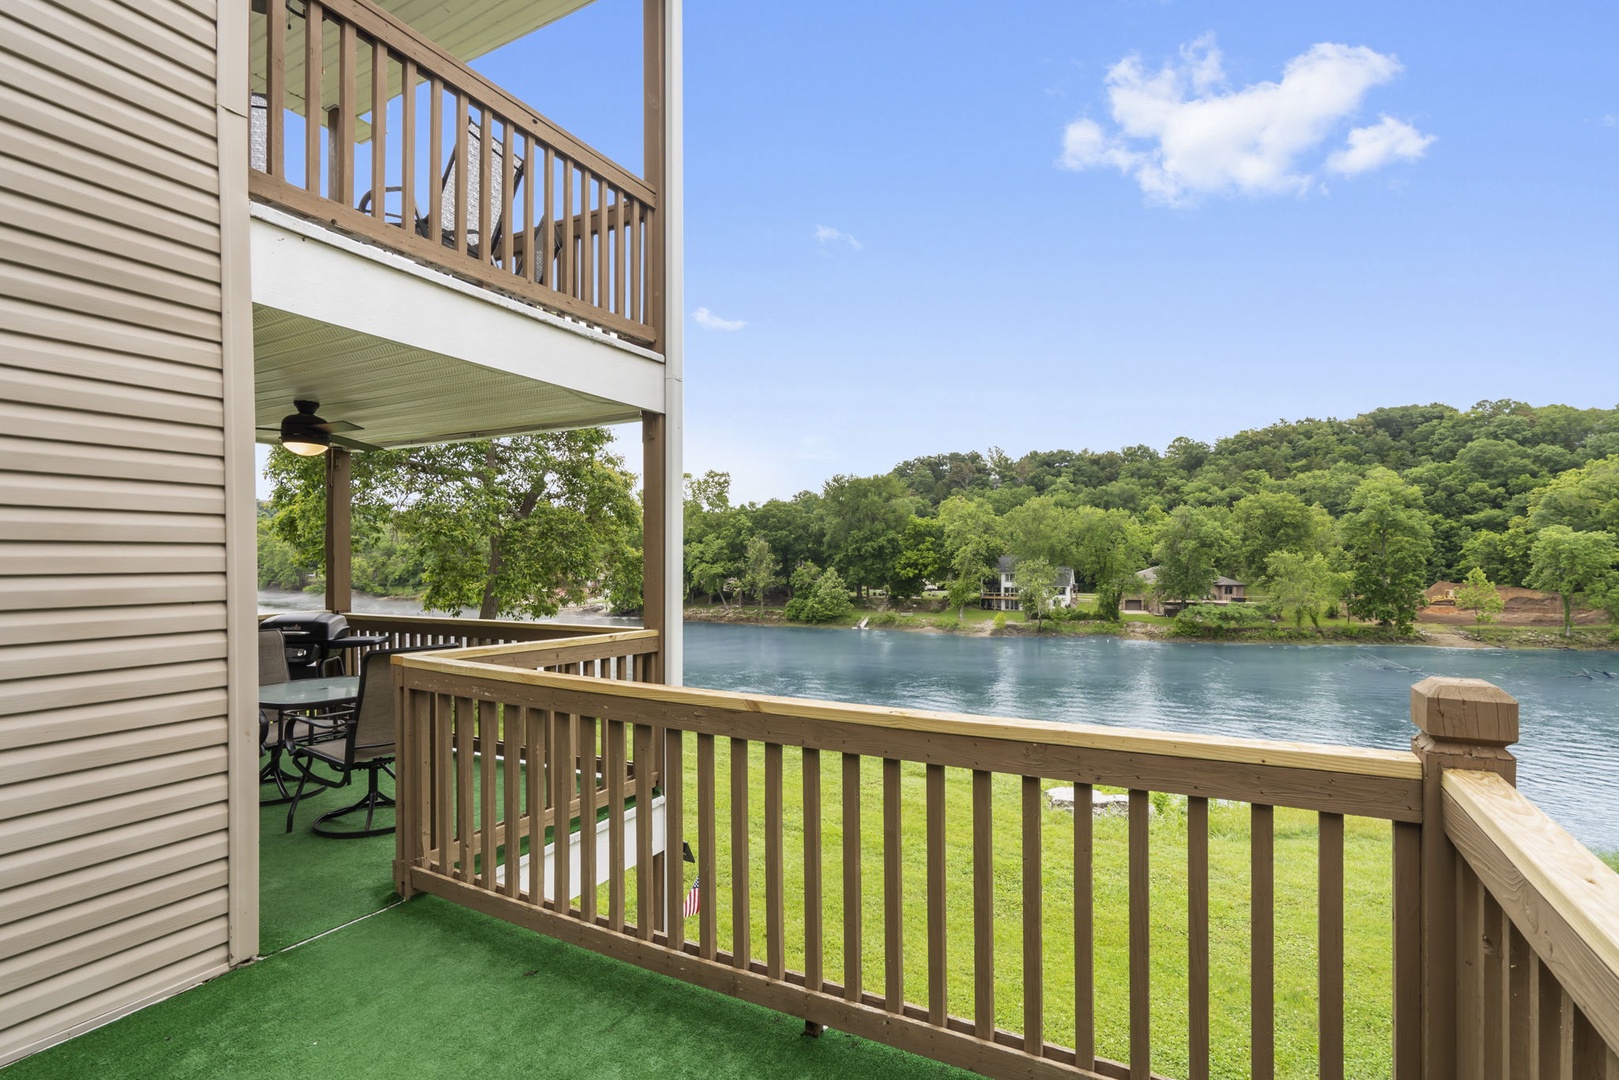 Enjoy the fresh air on the private deck overlooking the lake